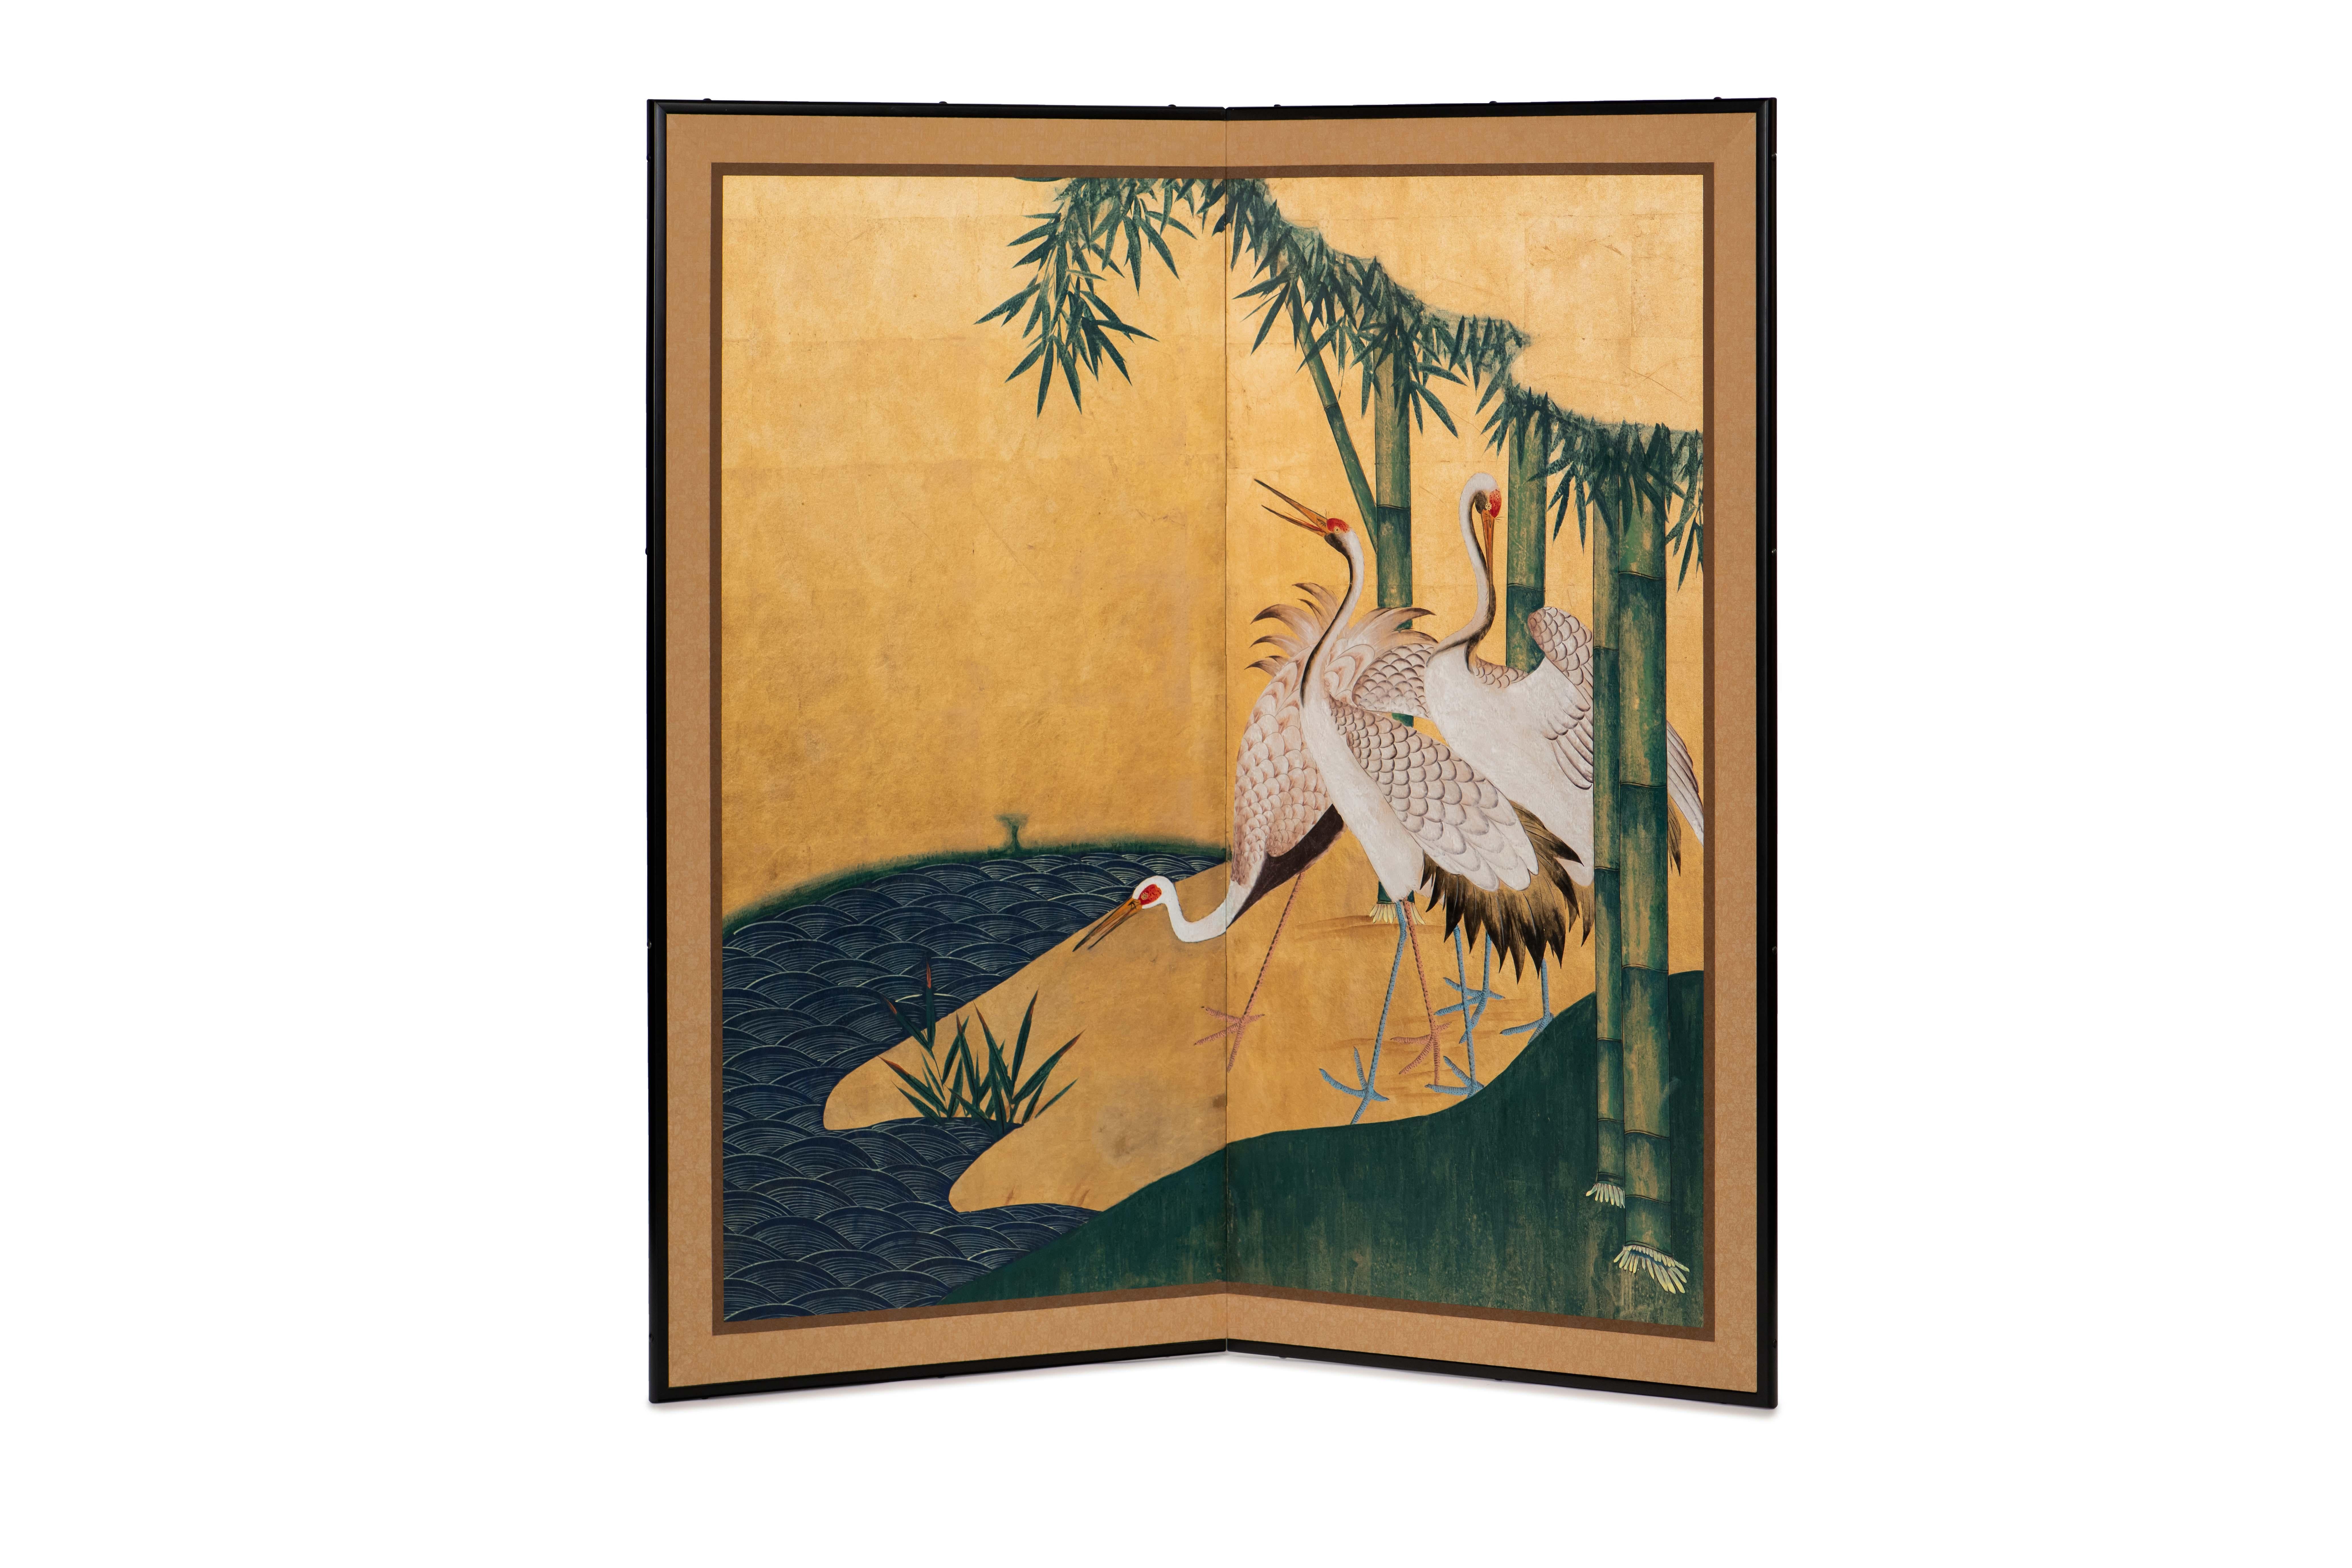 The cranes by the river painting of this two-panel screen is hand-painted in watercolor, on squares of gold leaf which are applied by hand to the paper base over carefully jointed wooden lattice frames. Lacquer wooden rails are then applied to the